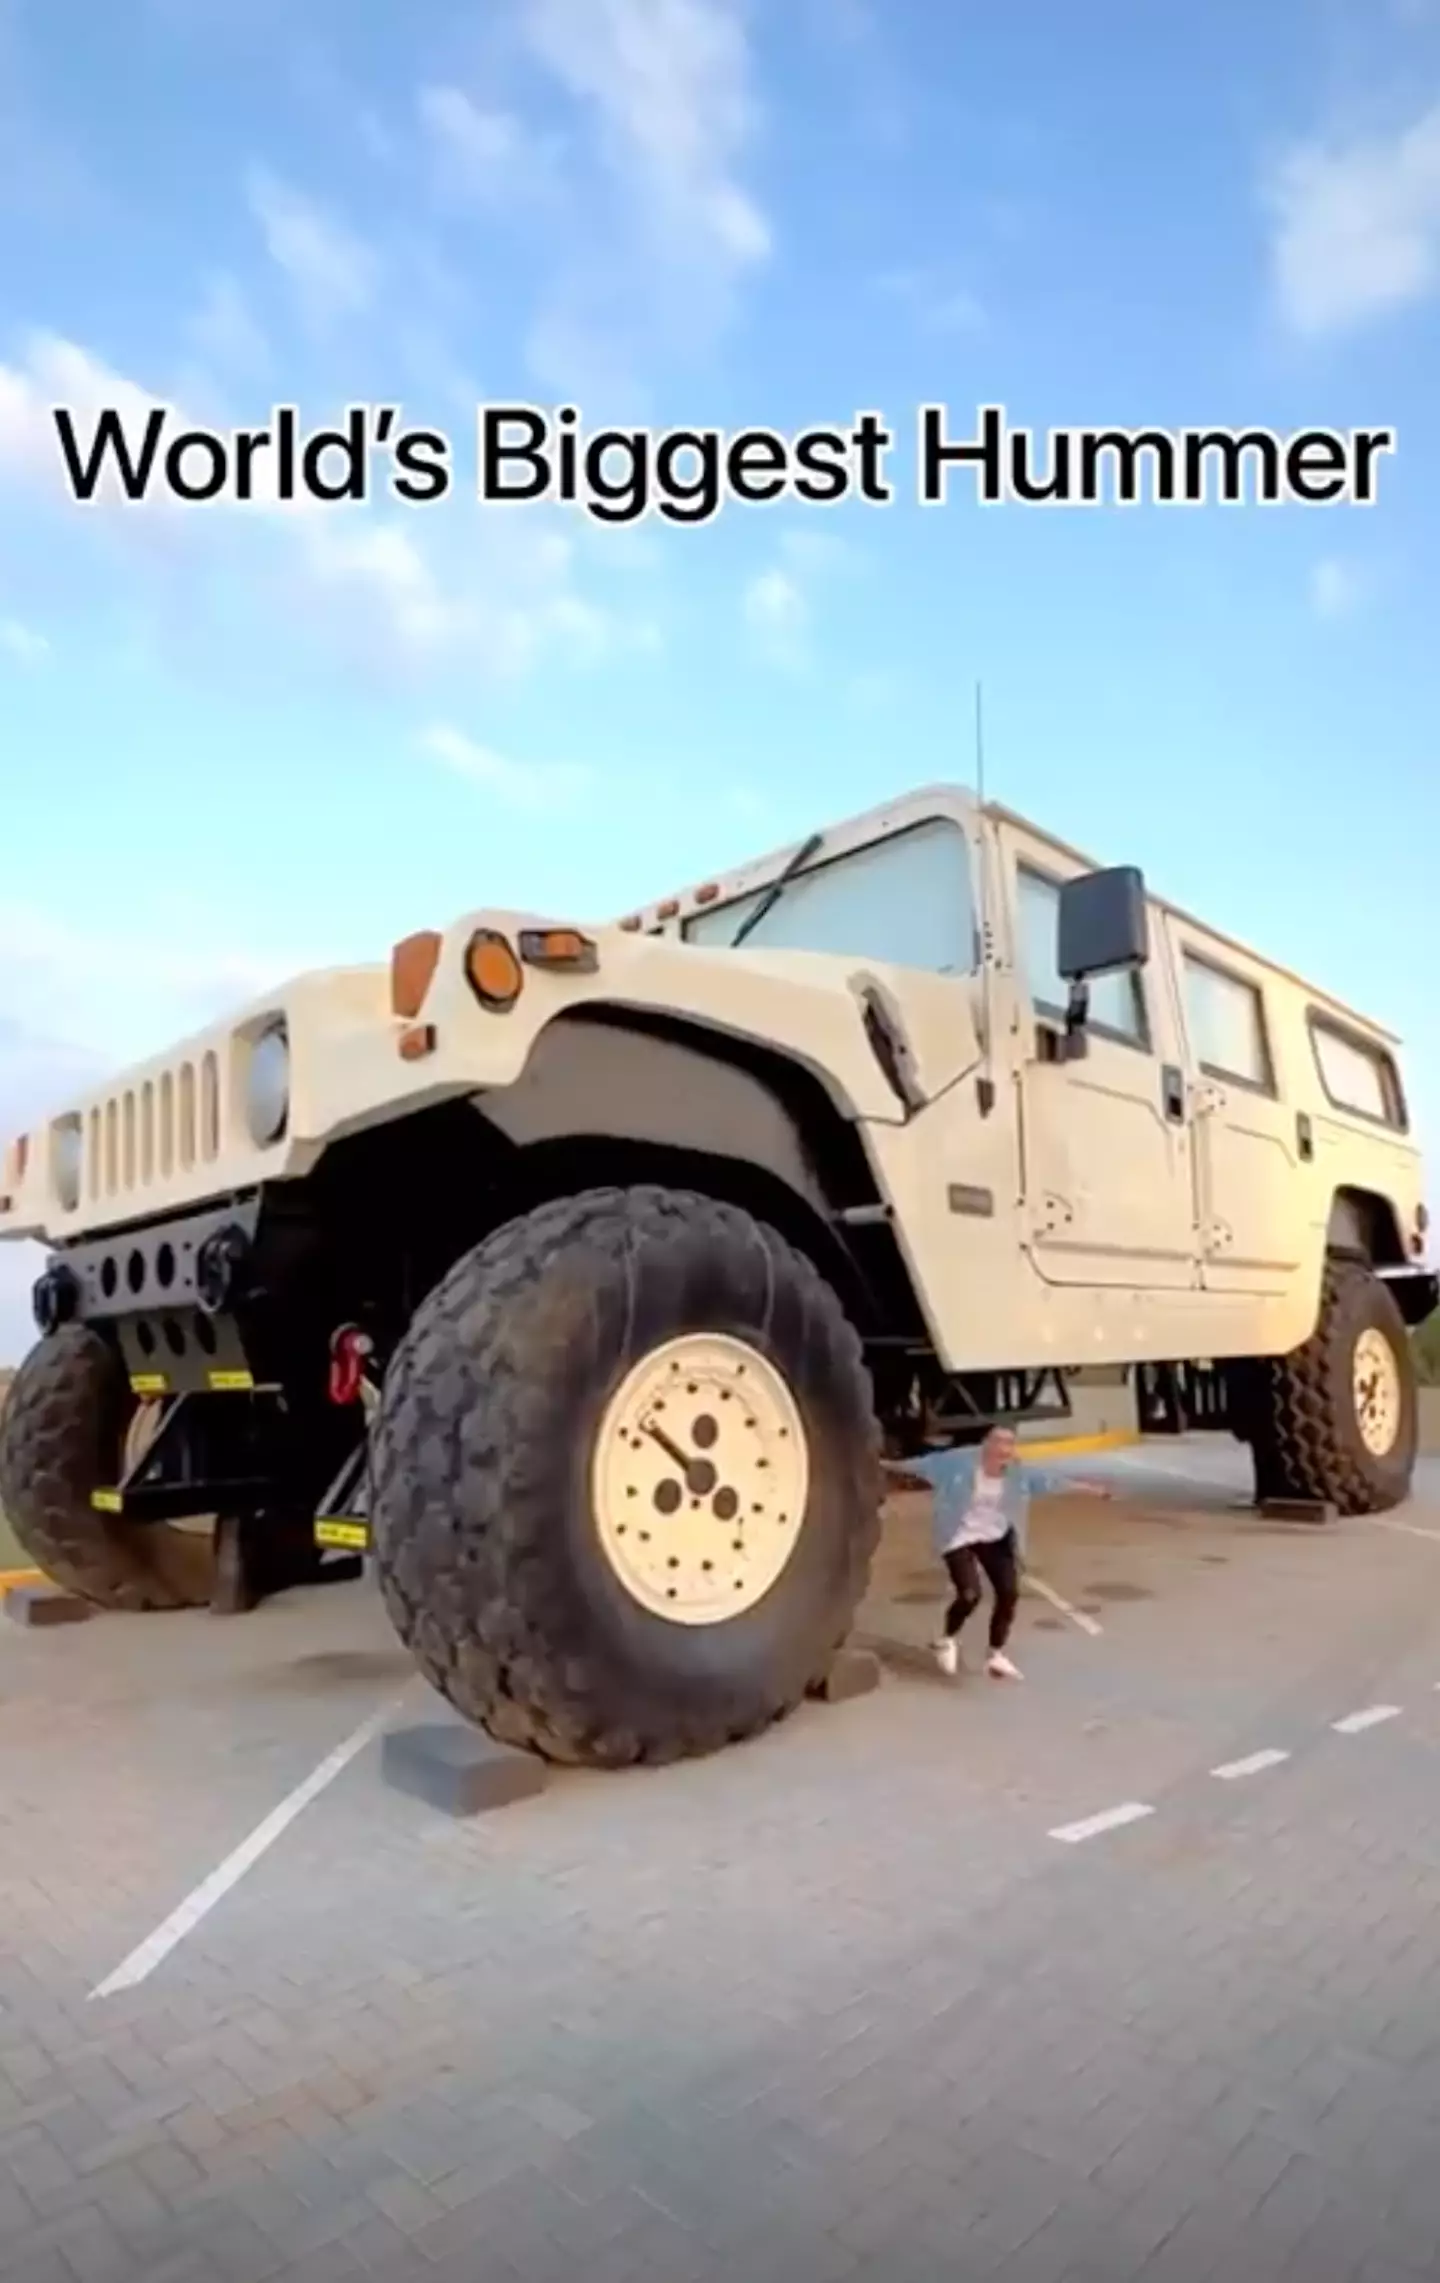 The massive hummer is about three times the size of a H1.